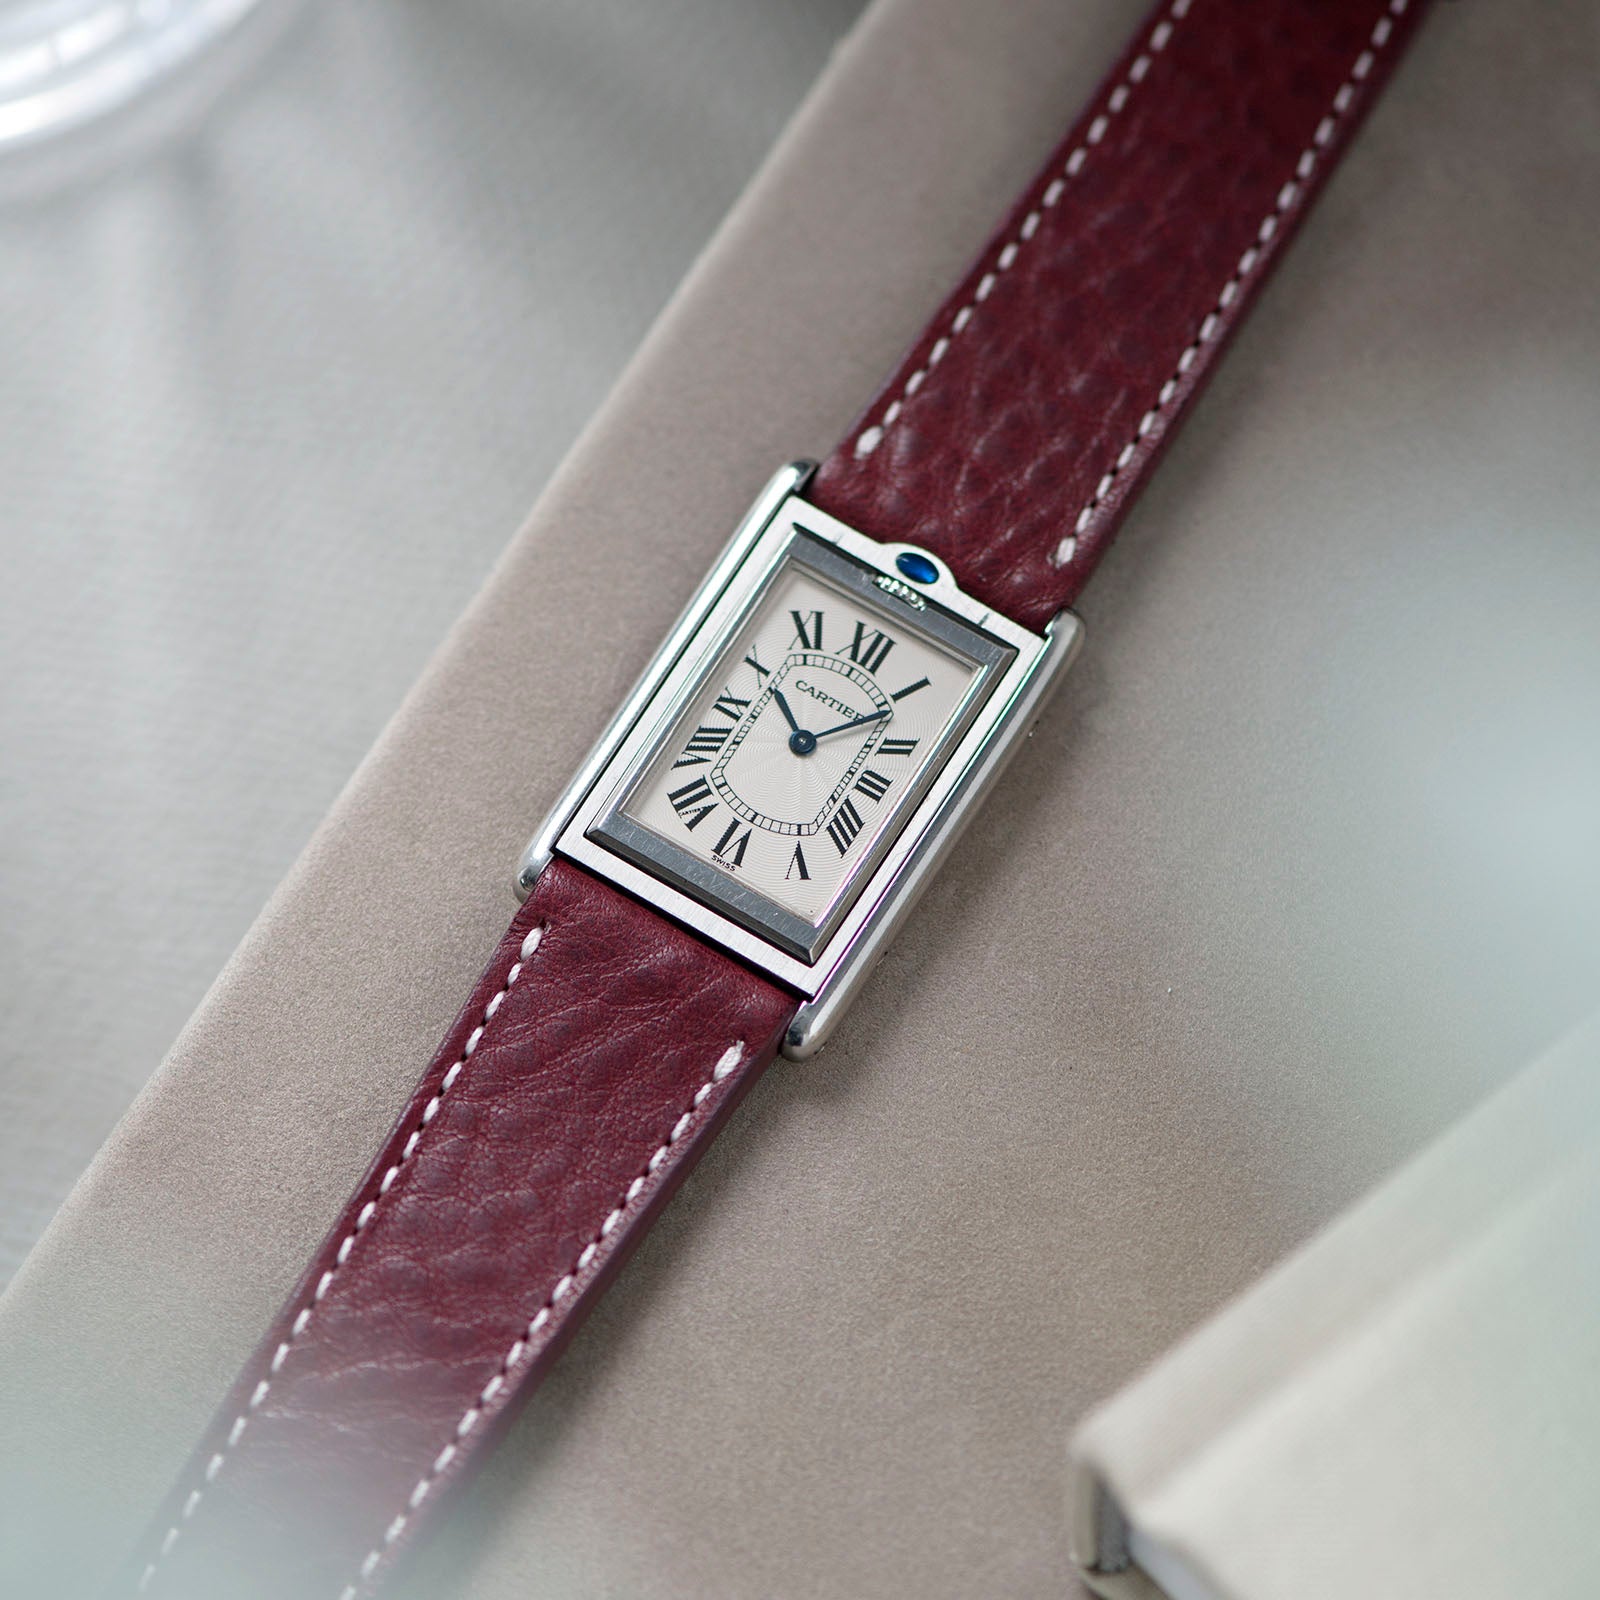 Bulang and Sons_Strap Guide_The Cartier Tank Basculante 20 mm_Burgundy Red Leather Watch Strap